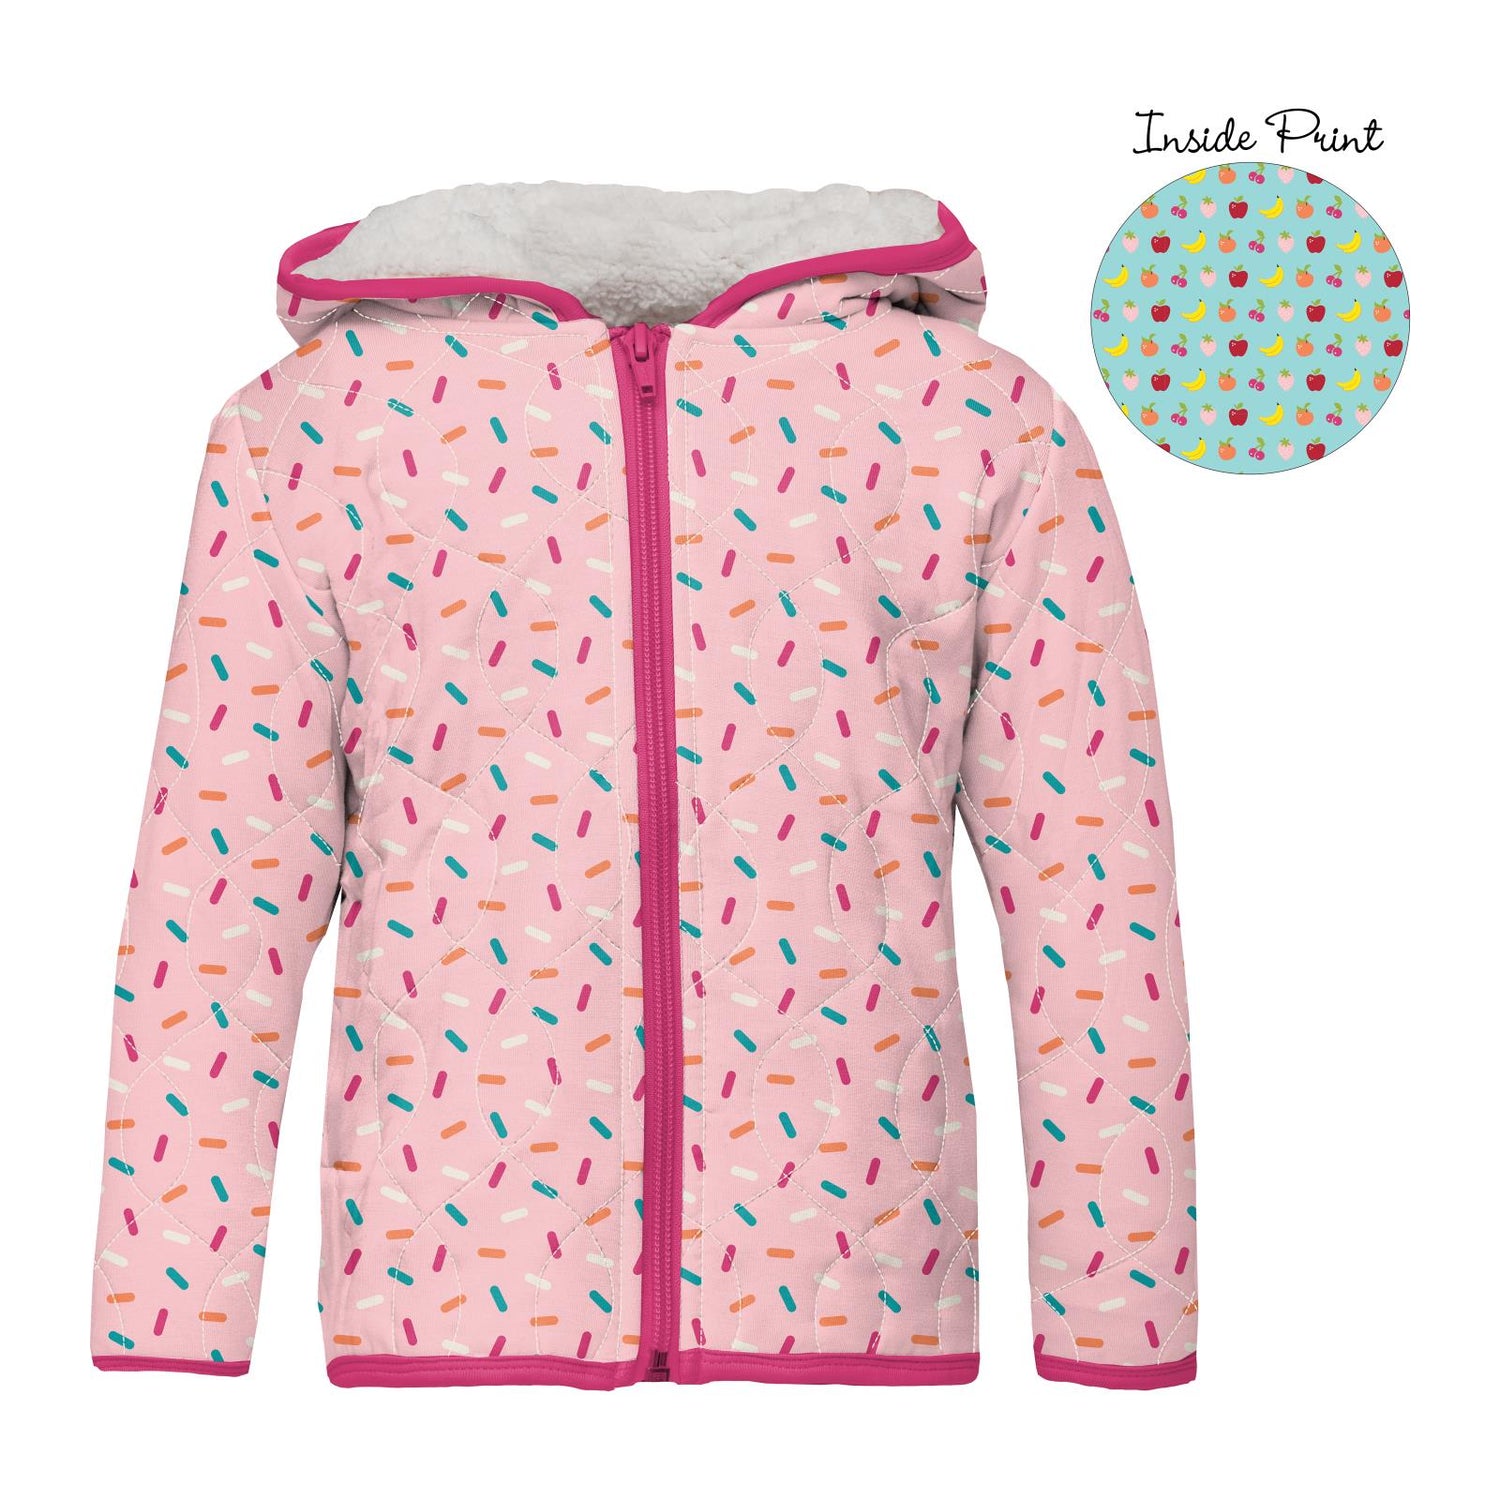 Print Quilted Jacket with Sherpa-Lined Hood in Lotus Sprinkles/Summer Sky Mini Fruits